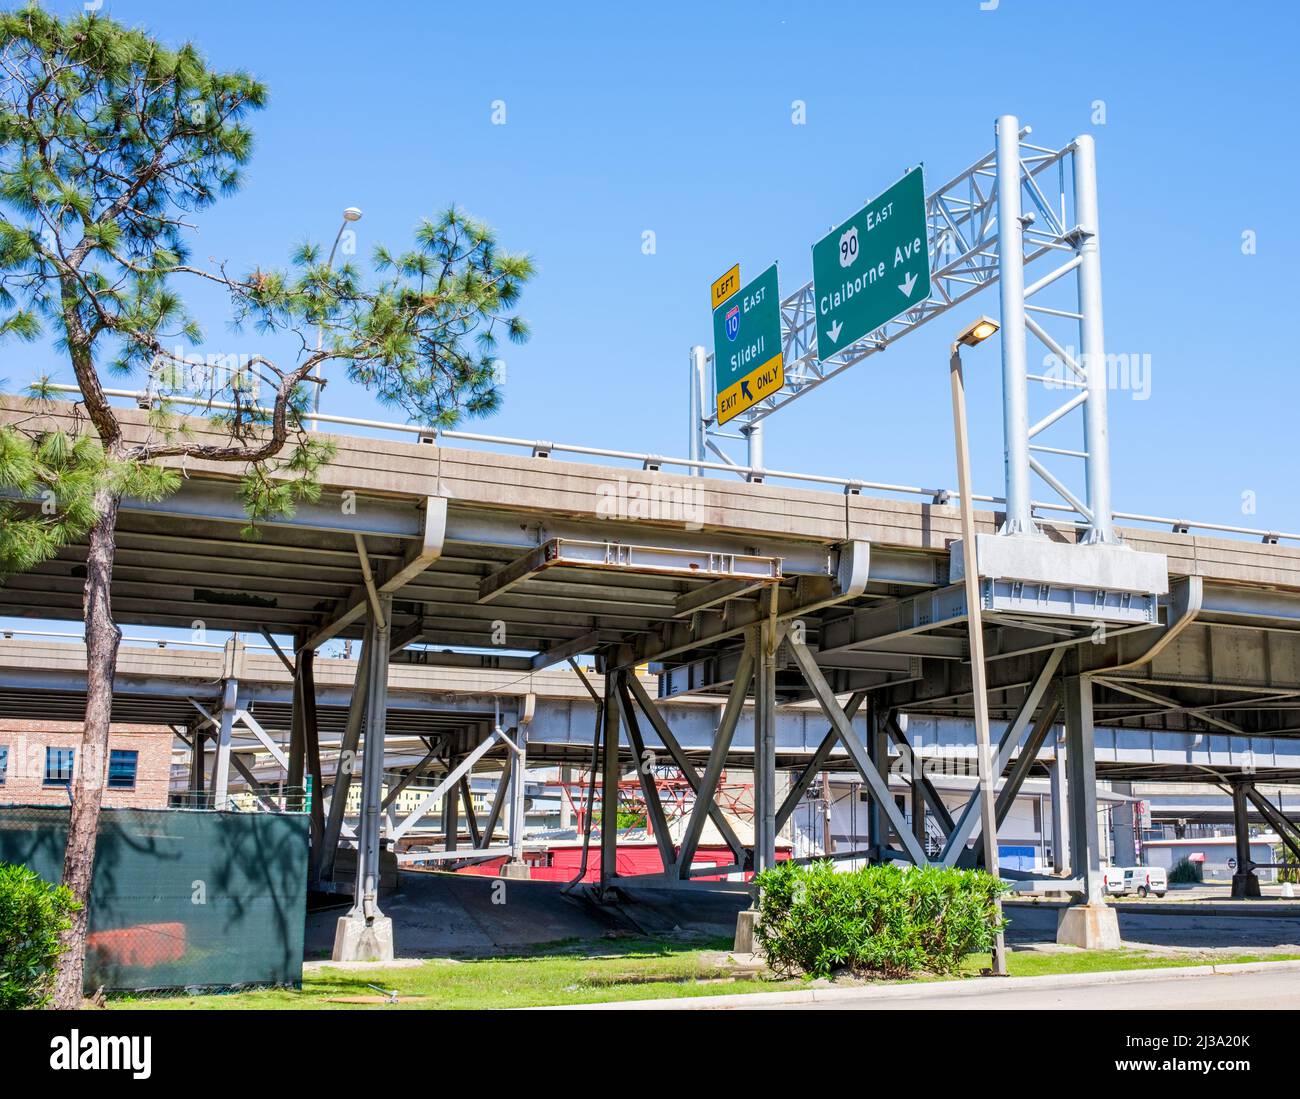 NEW ORLEANS, LA, USA - APRIL 3, 2022: Elevated highway over Claiborne Avenue with road signs for Claiborne Avenue and Sidell Exits Stock Photo